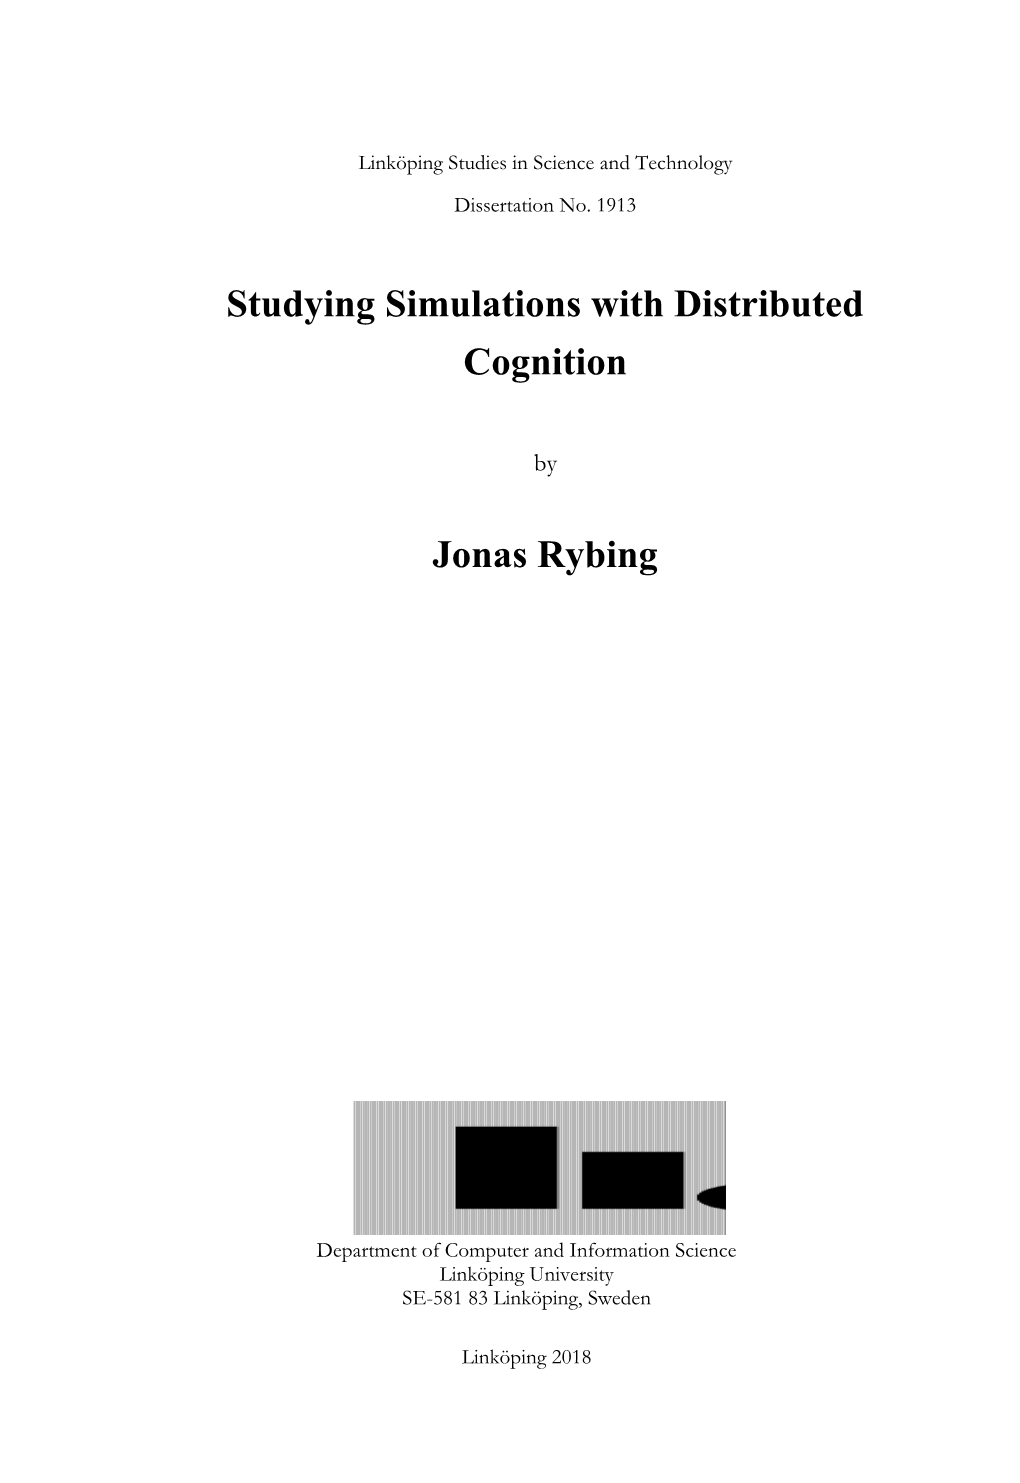 Studying Simulations with Distributed Cognition